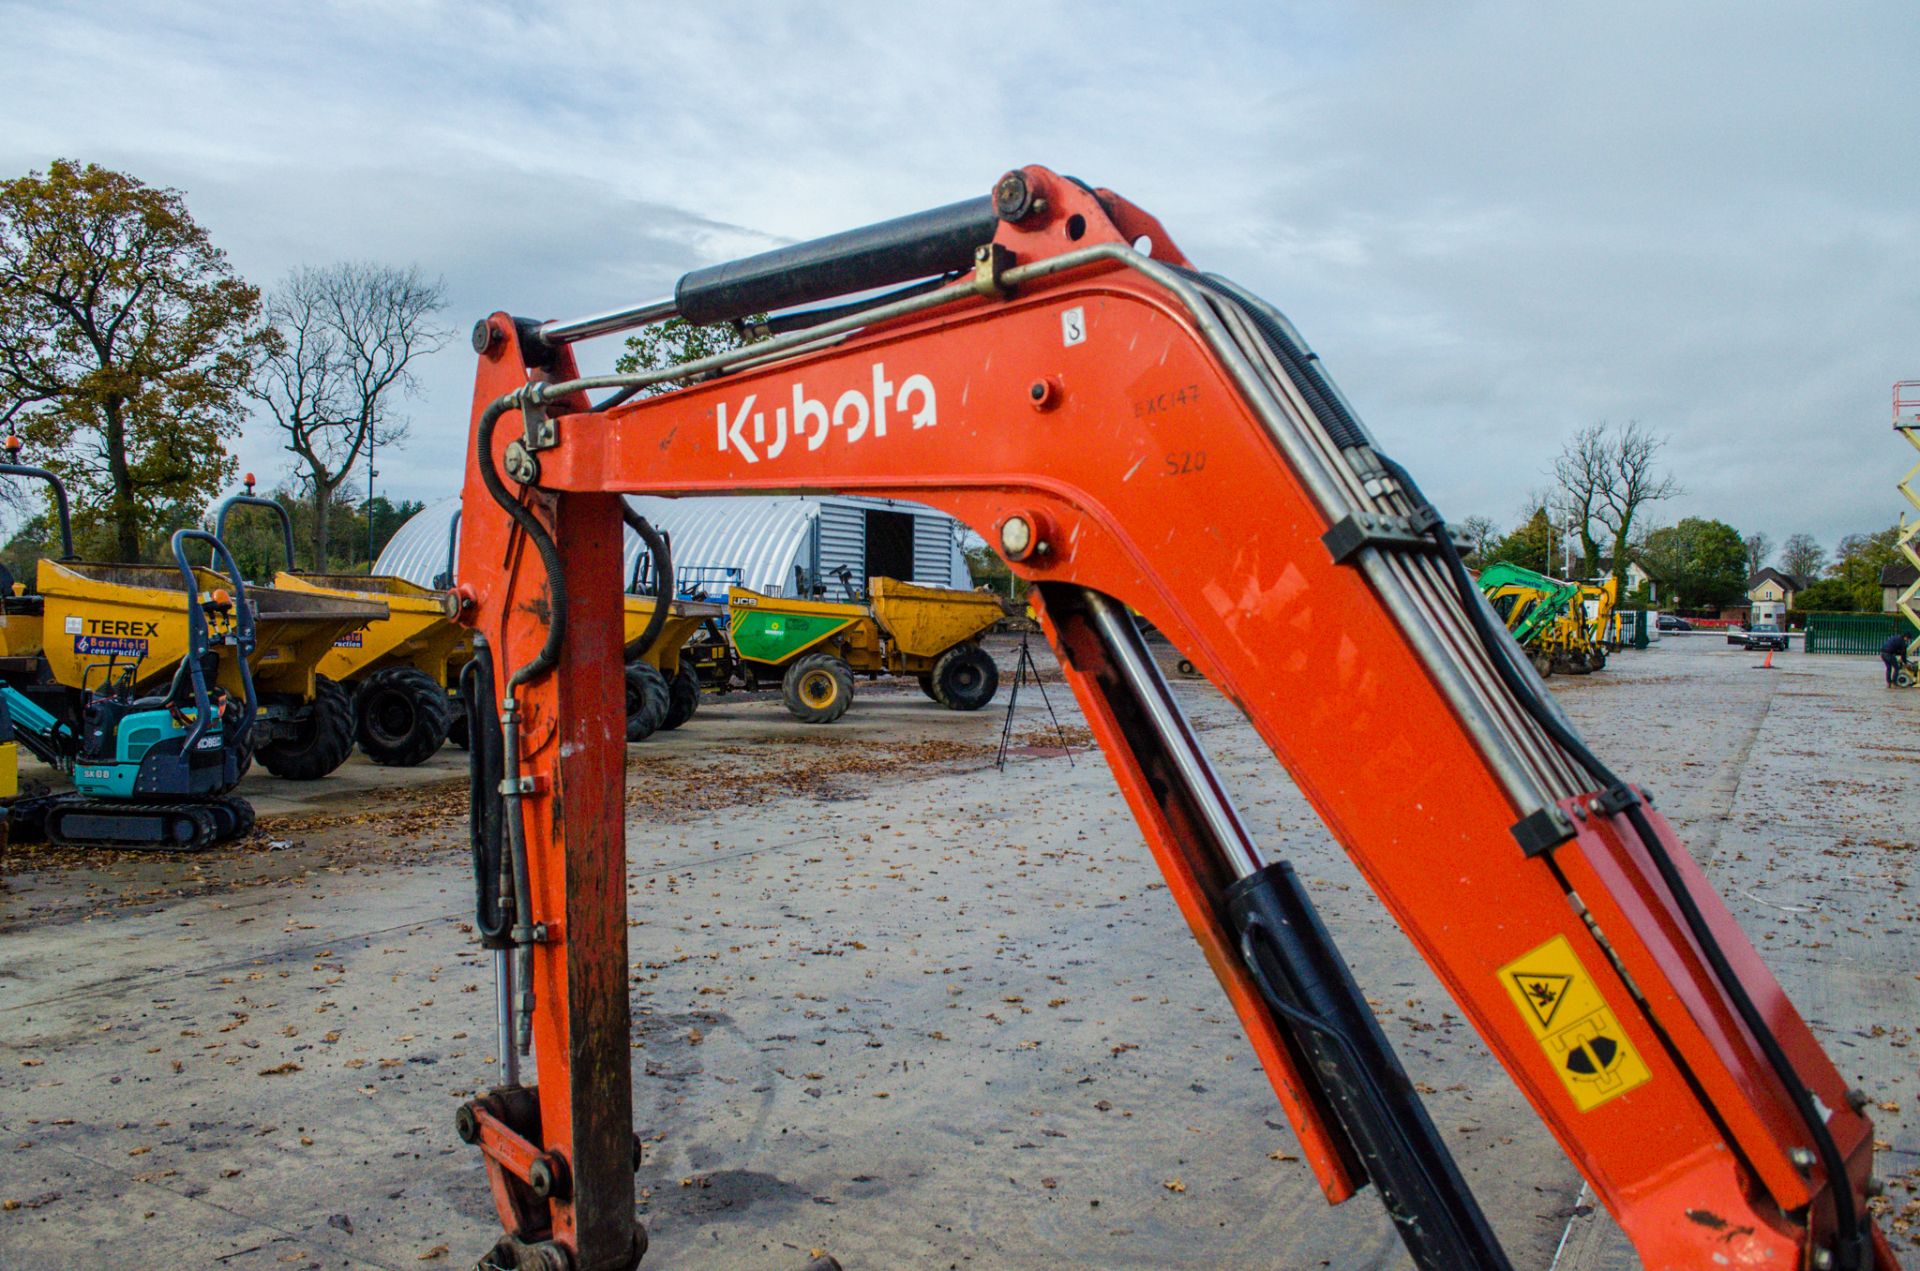 Kubota KX61-3 2.6 tonne rubber tracked excavator Year: 2015 S/N: 81787 Recorded Hours: 2860 EXC149 - Image 10 of 18